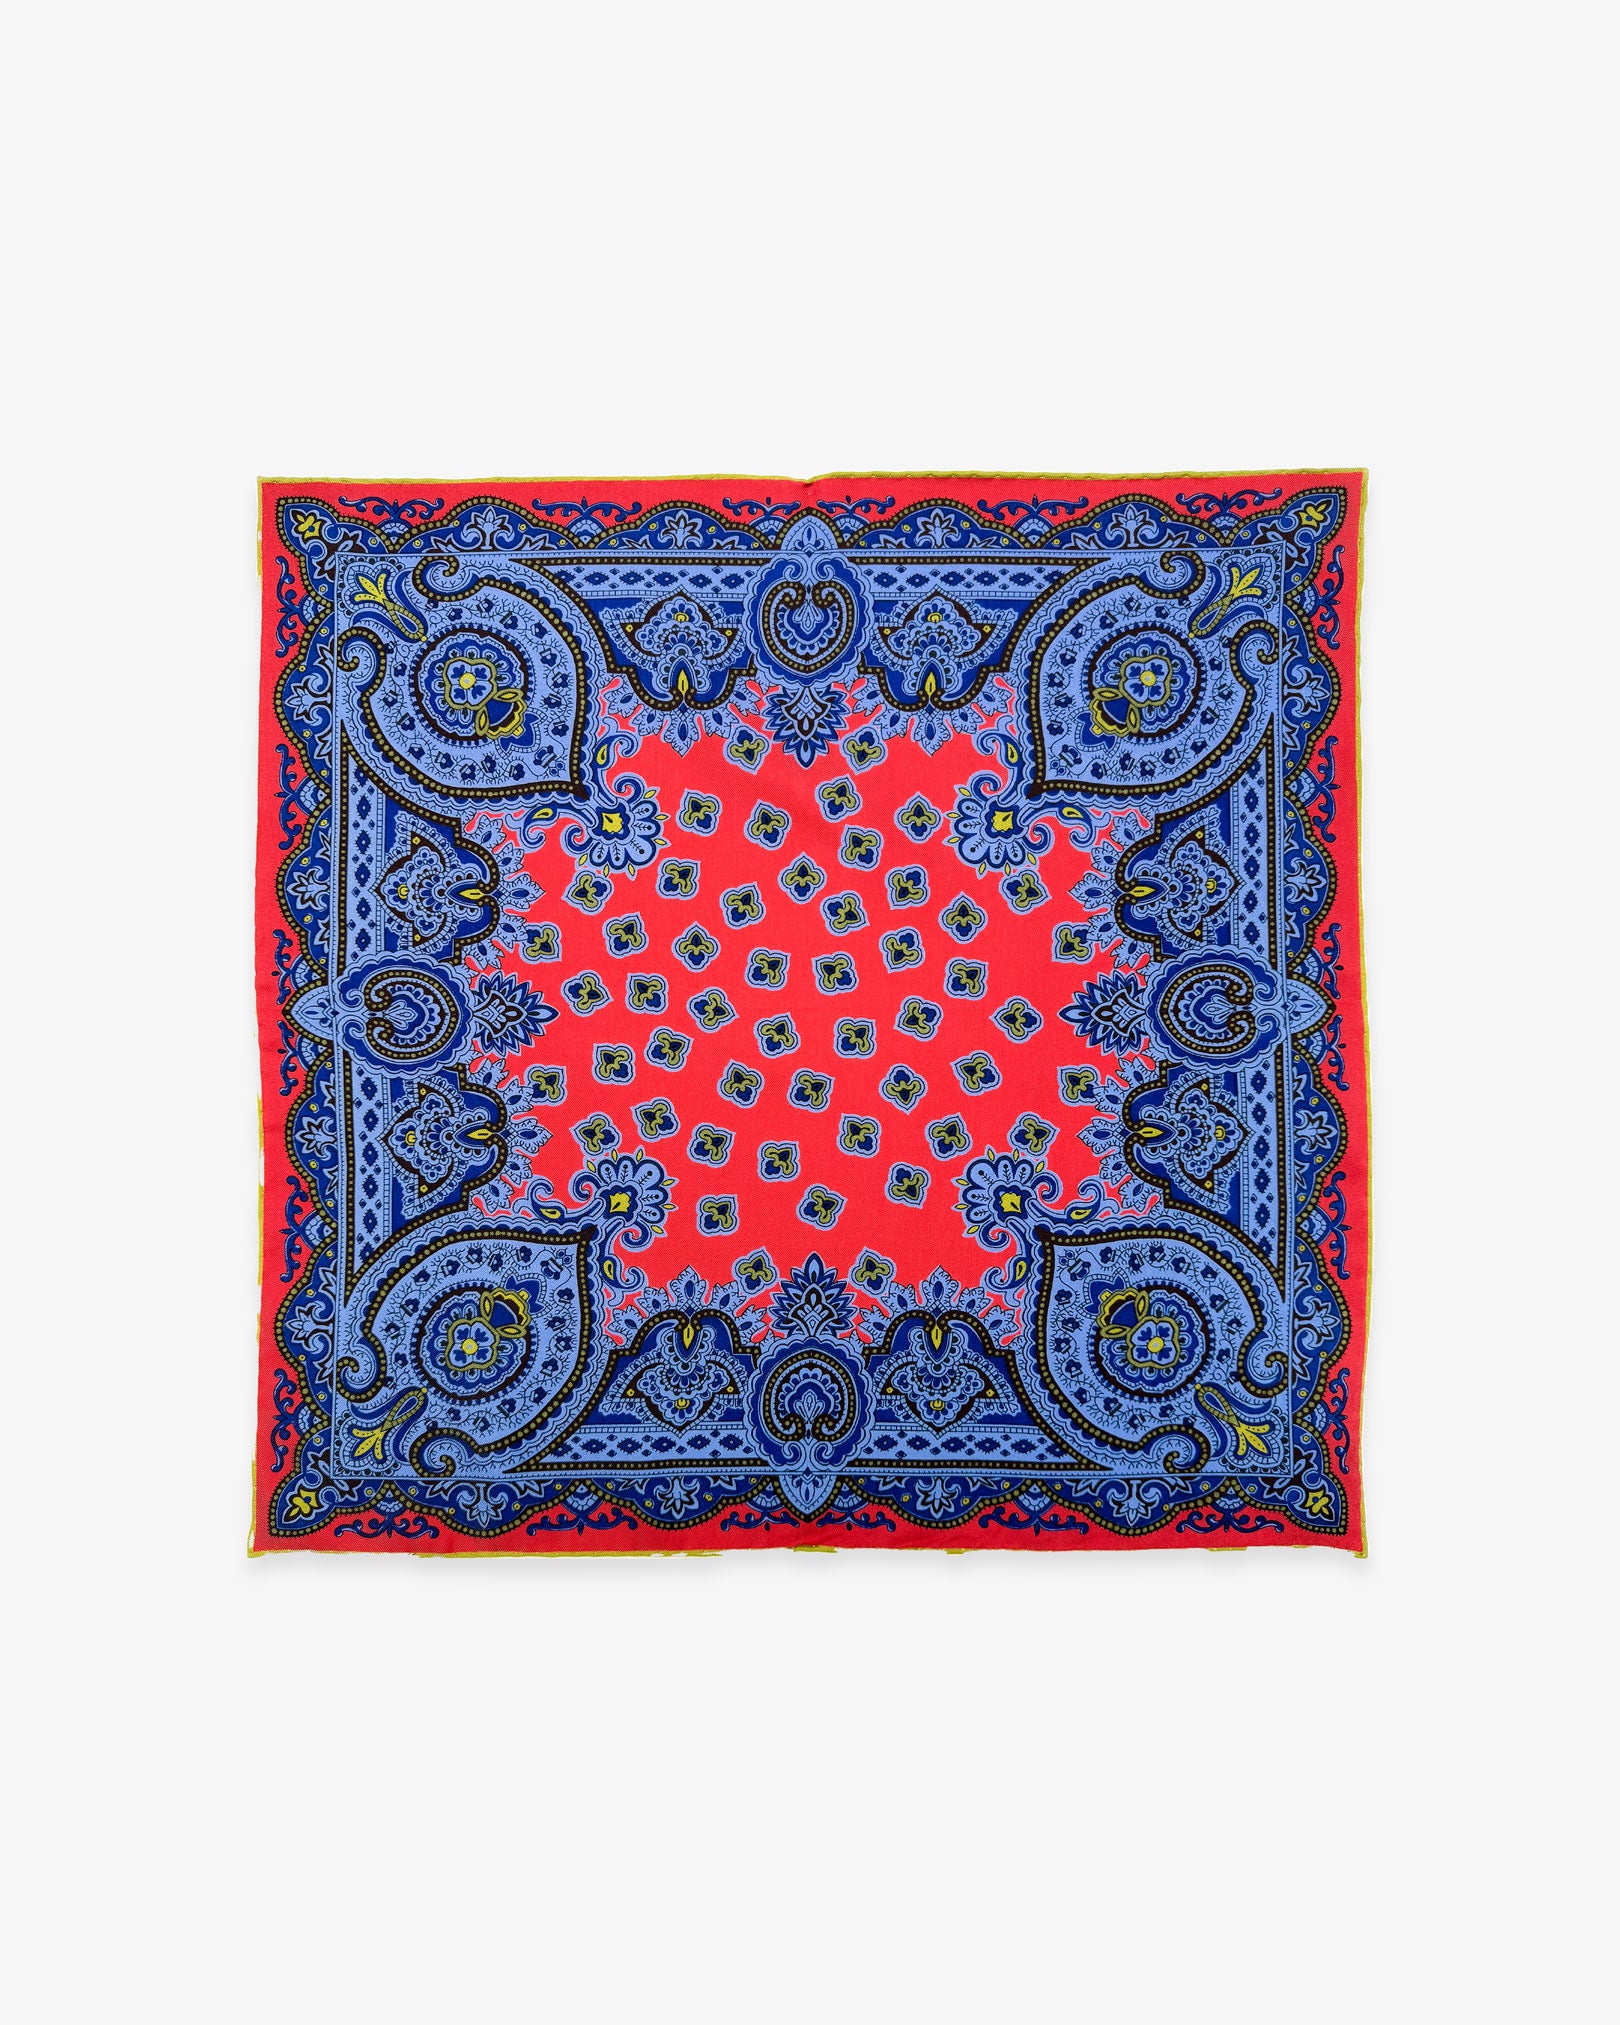 Fully unfolded 'Aldborough' English madder silk pocket square, showing the exquisitely ornate blue and red design with pale golden highlights.